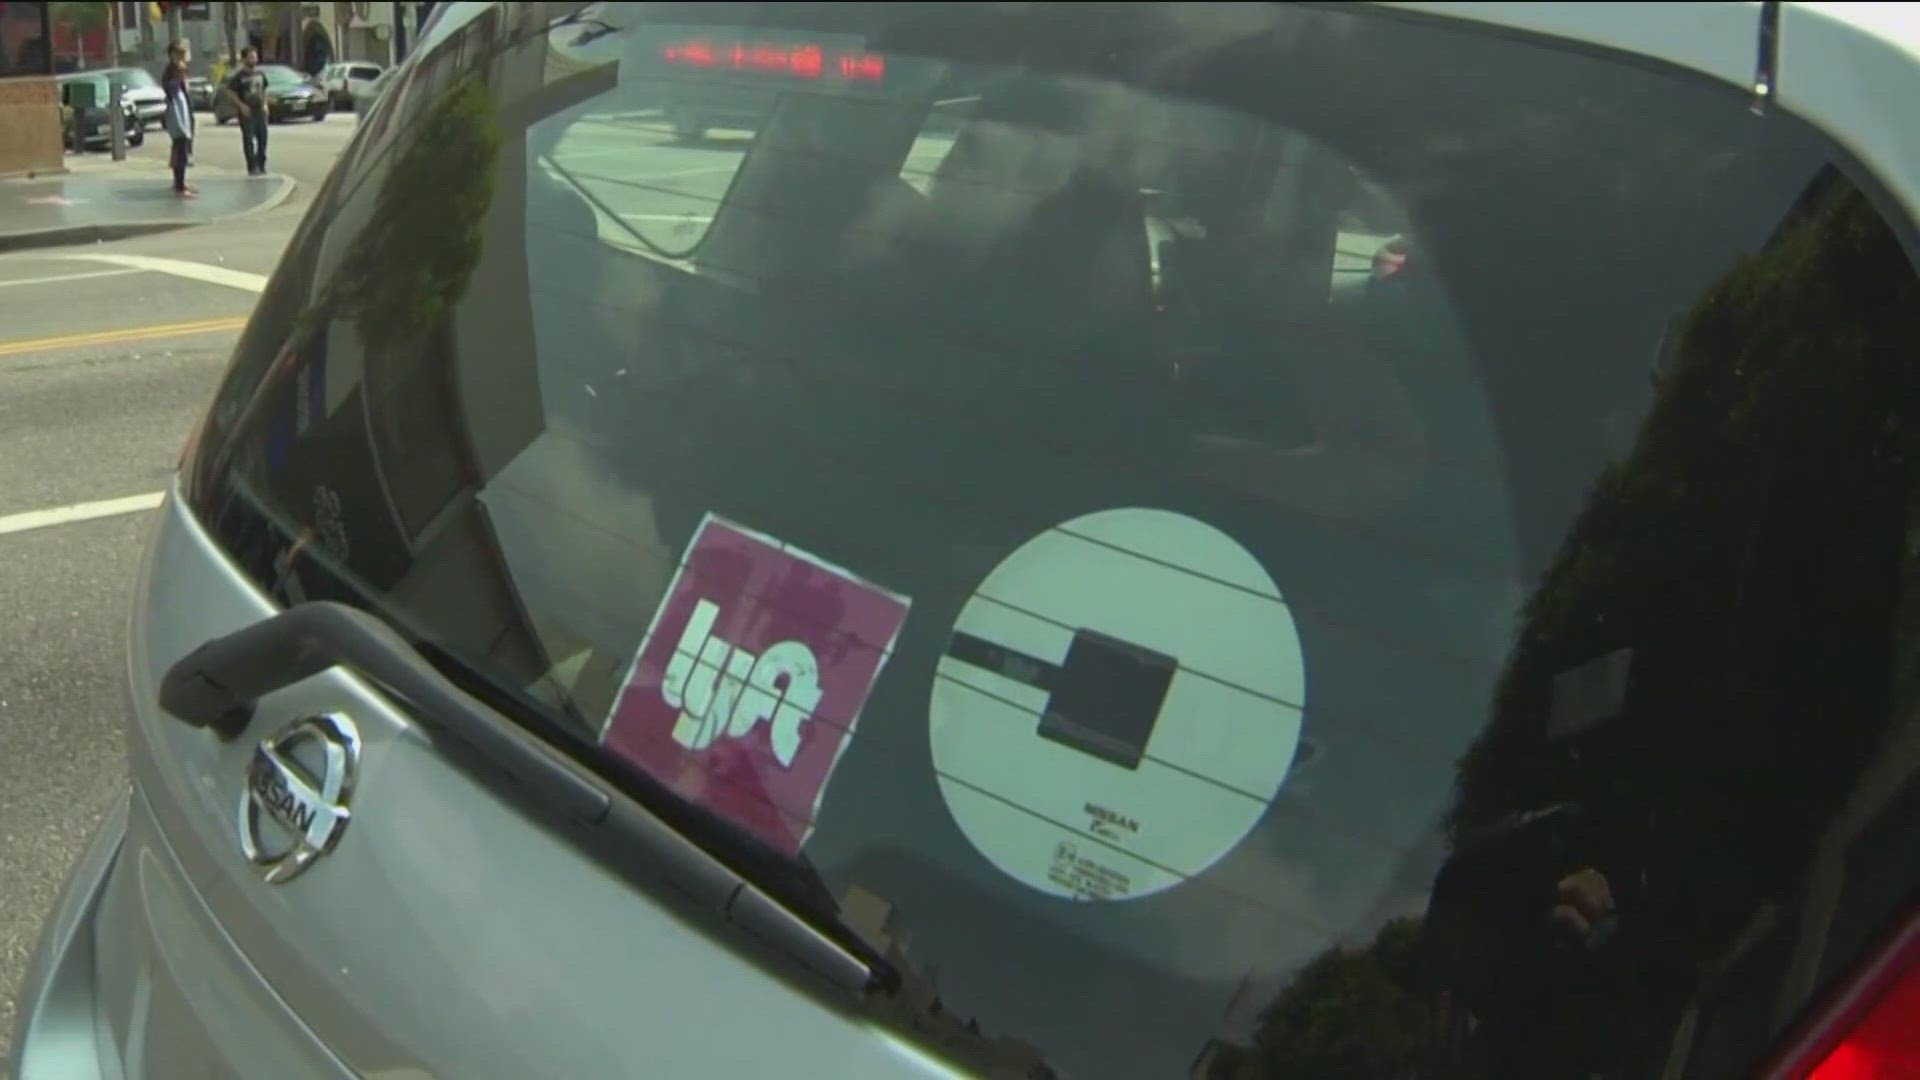 On Thursday, the Minneapolis City Council could vote to reconsider the ordinance that prompted the rideshare companies to announce they'd leave if implemented.